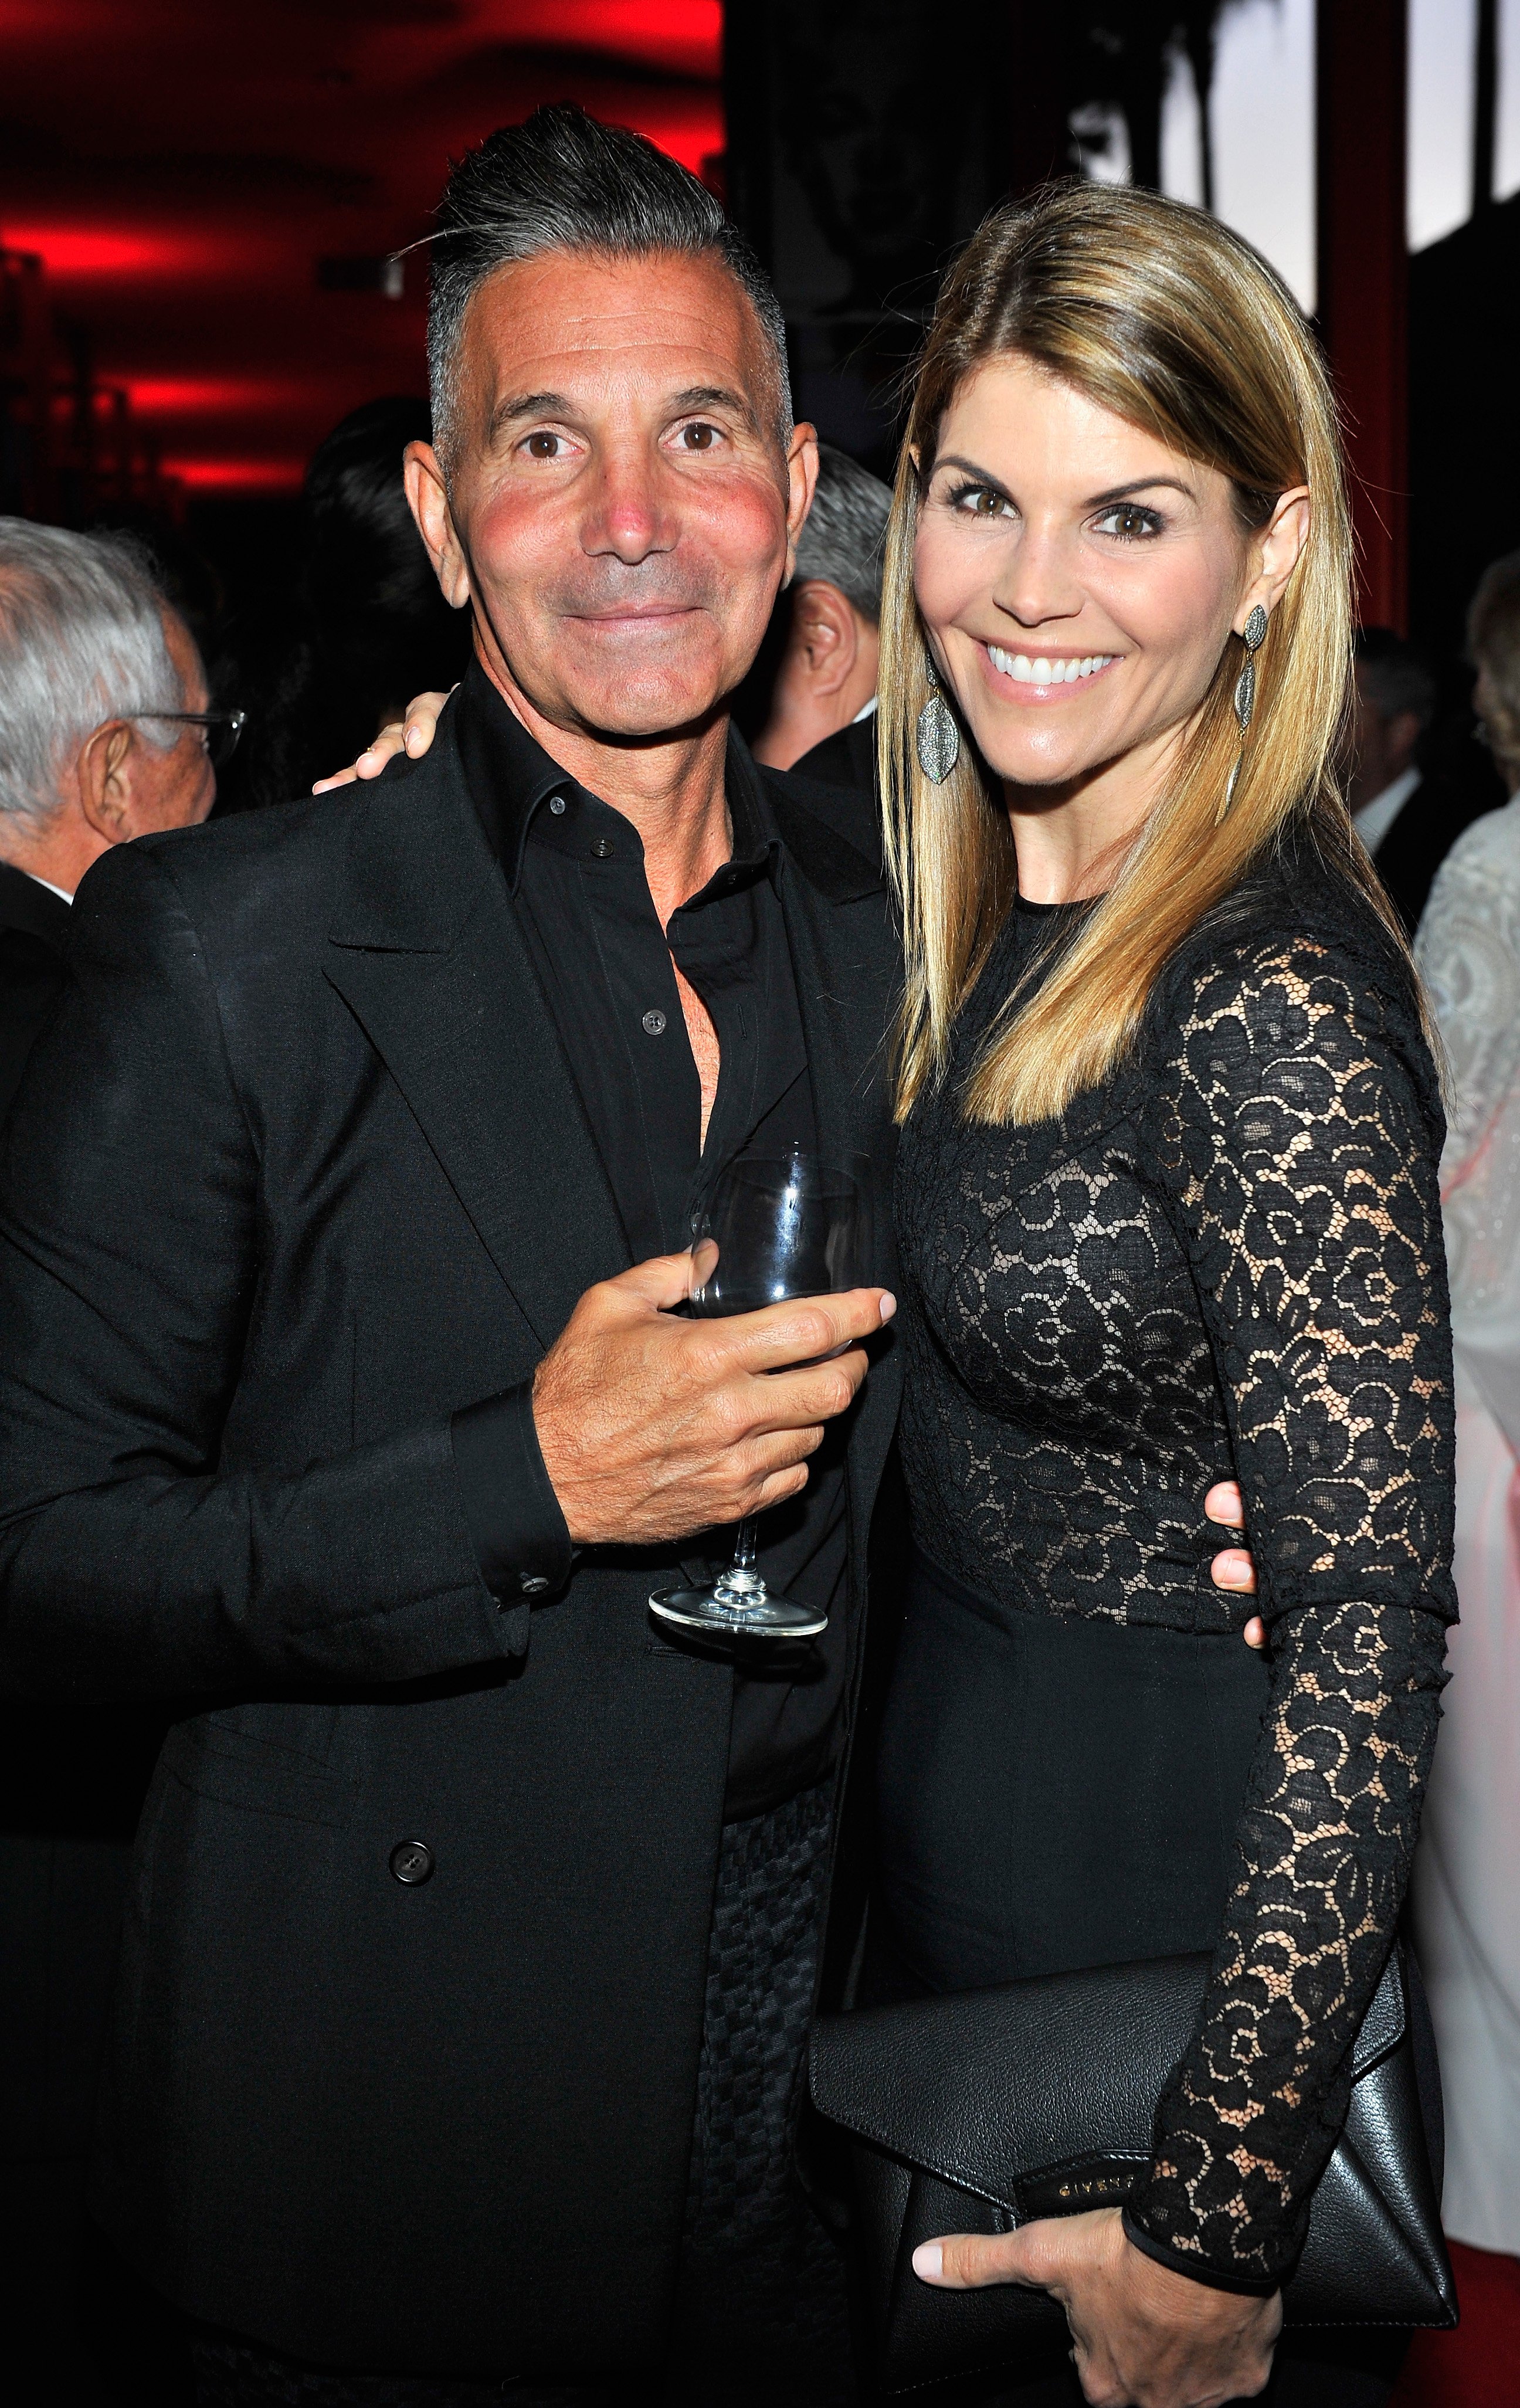 Lori Loughlin with her husband Mossimo Giannulli at the LACMA's 50th Anniversary Gala | Photo: Getty Images